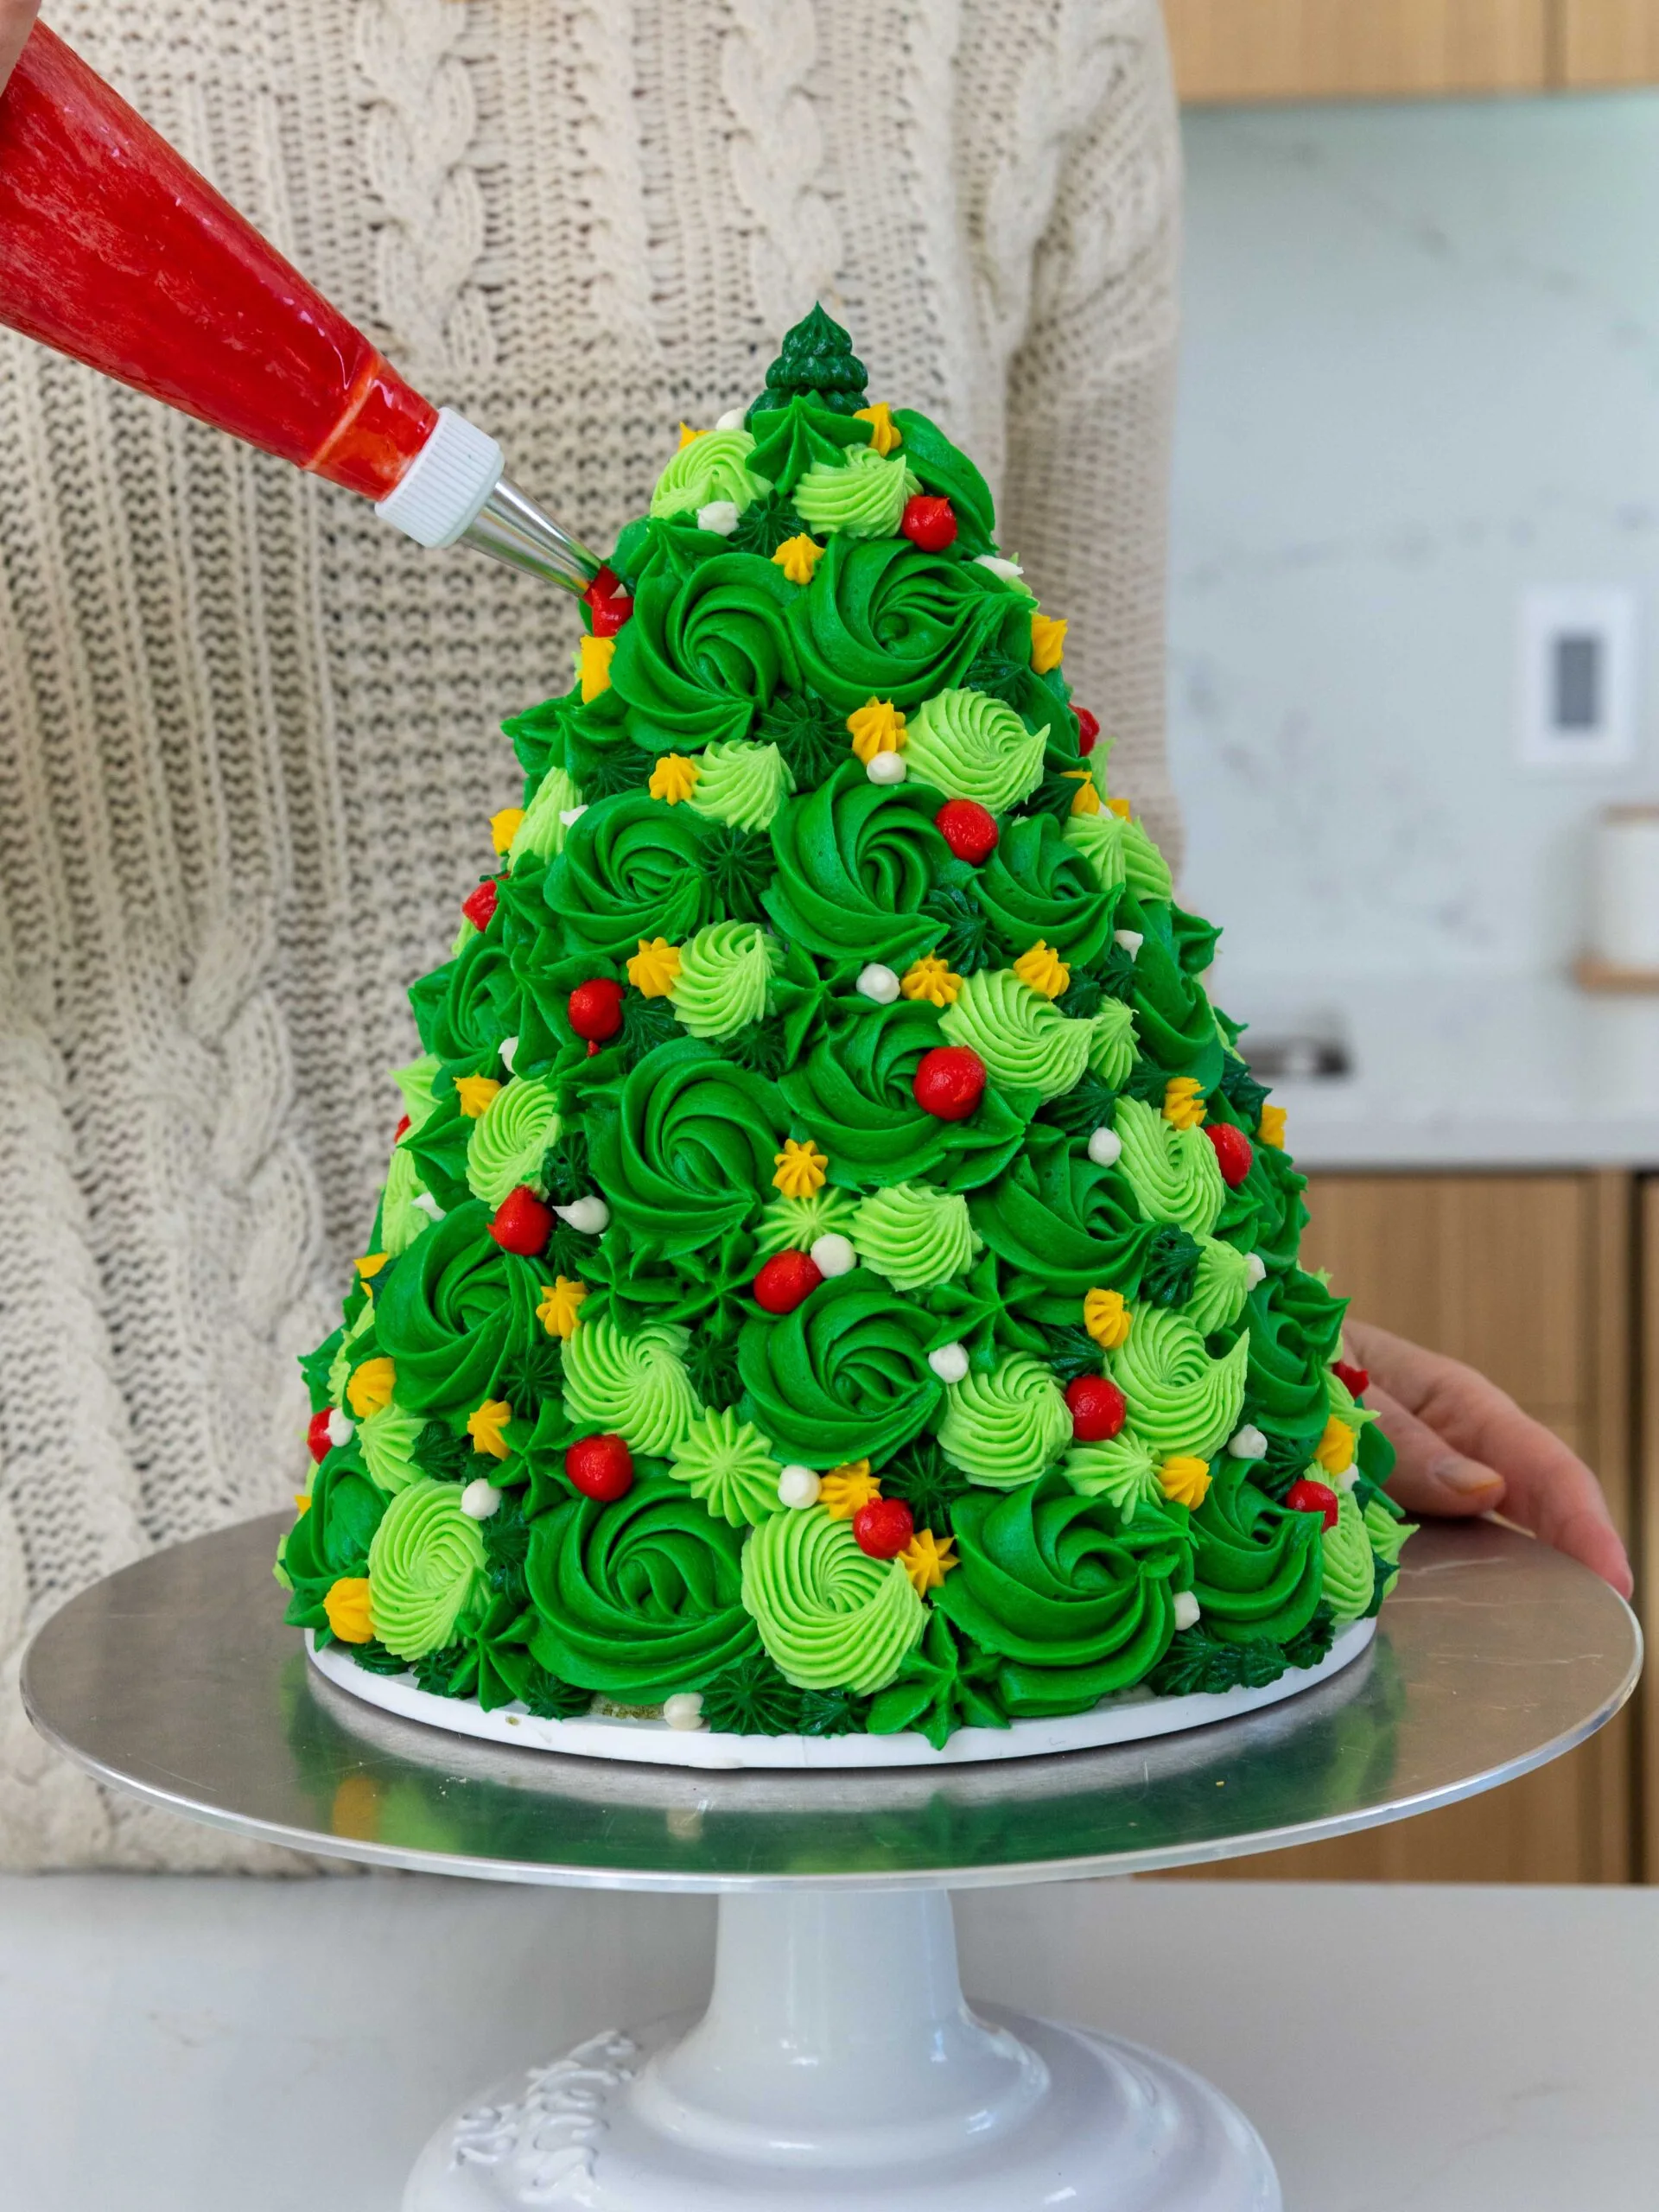 image of buttercream swirls being piped onto a Christmas tree cake